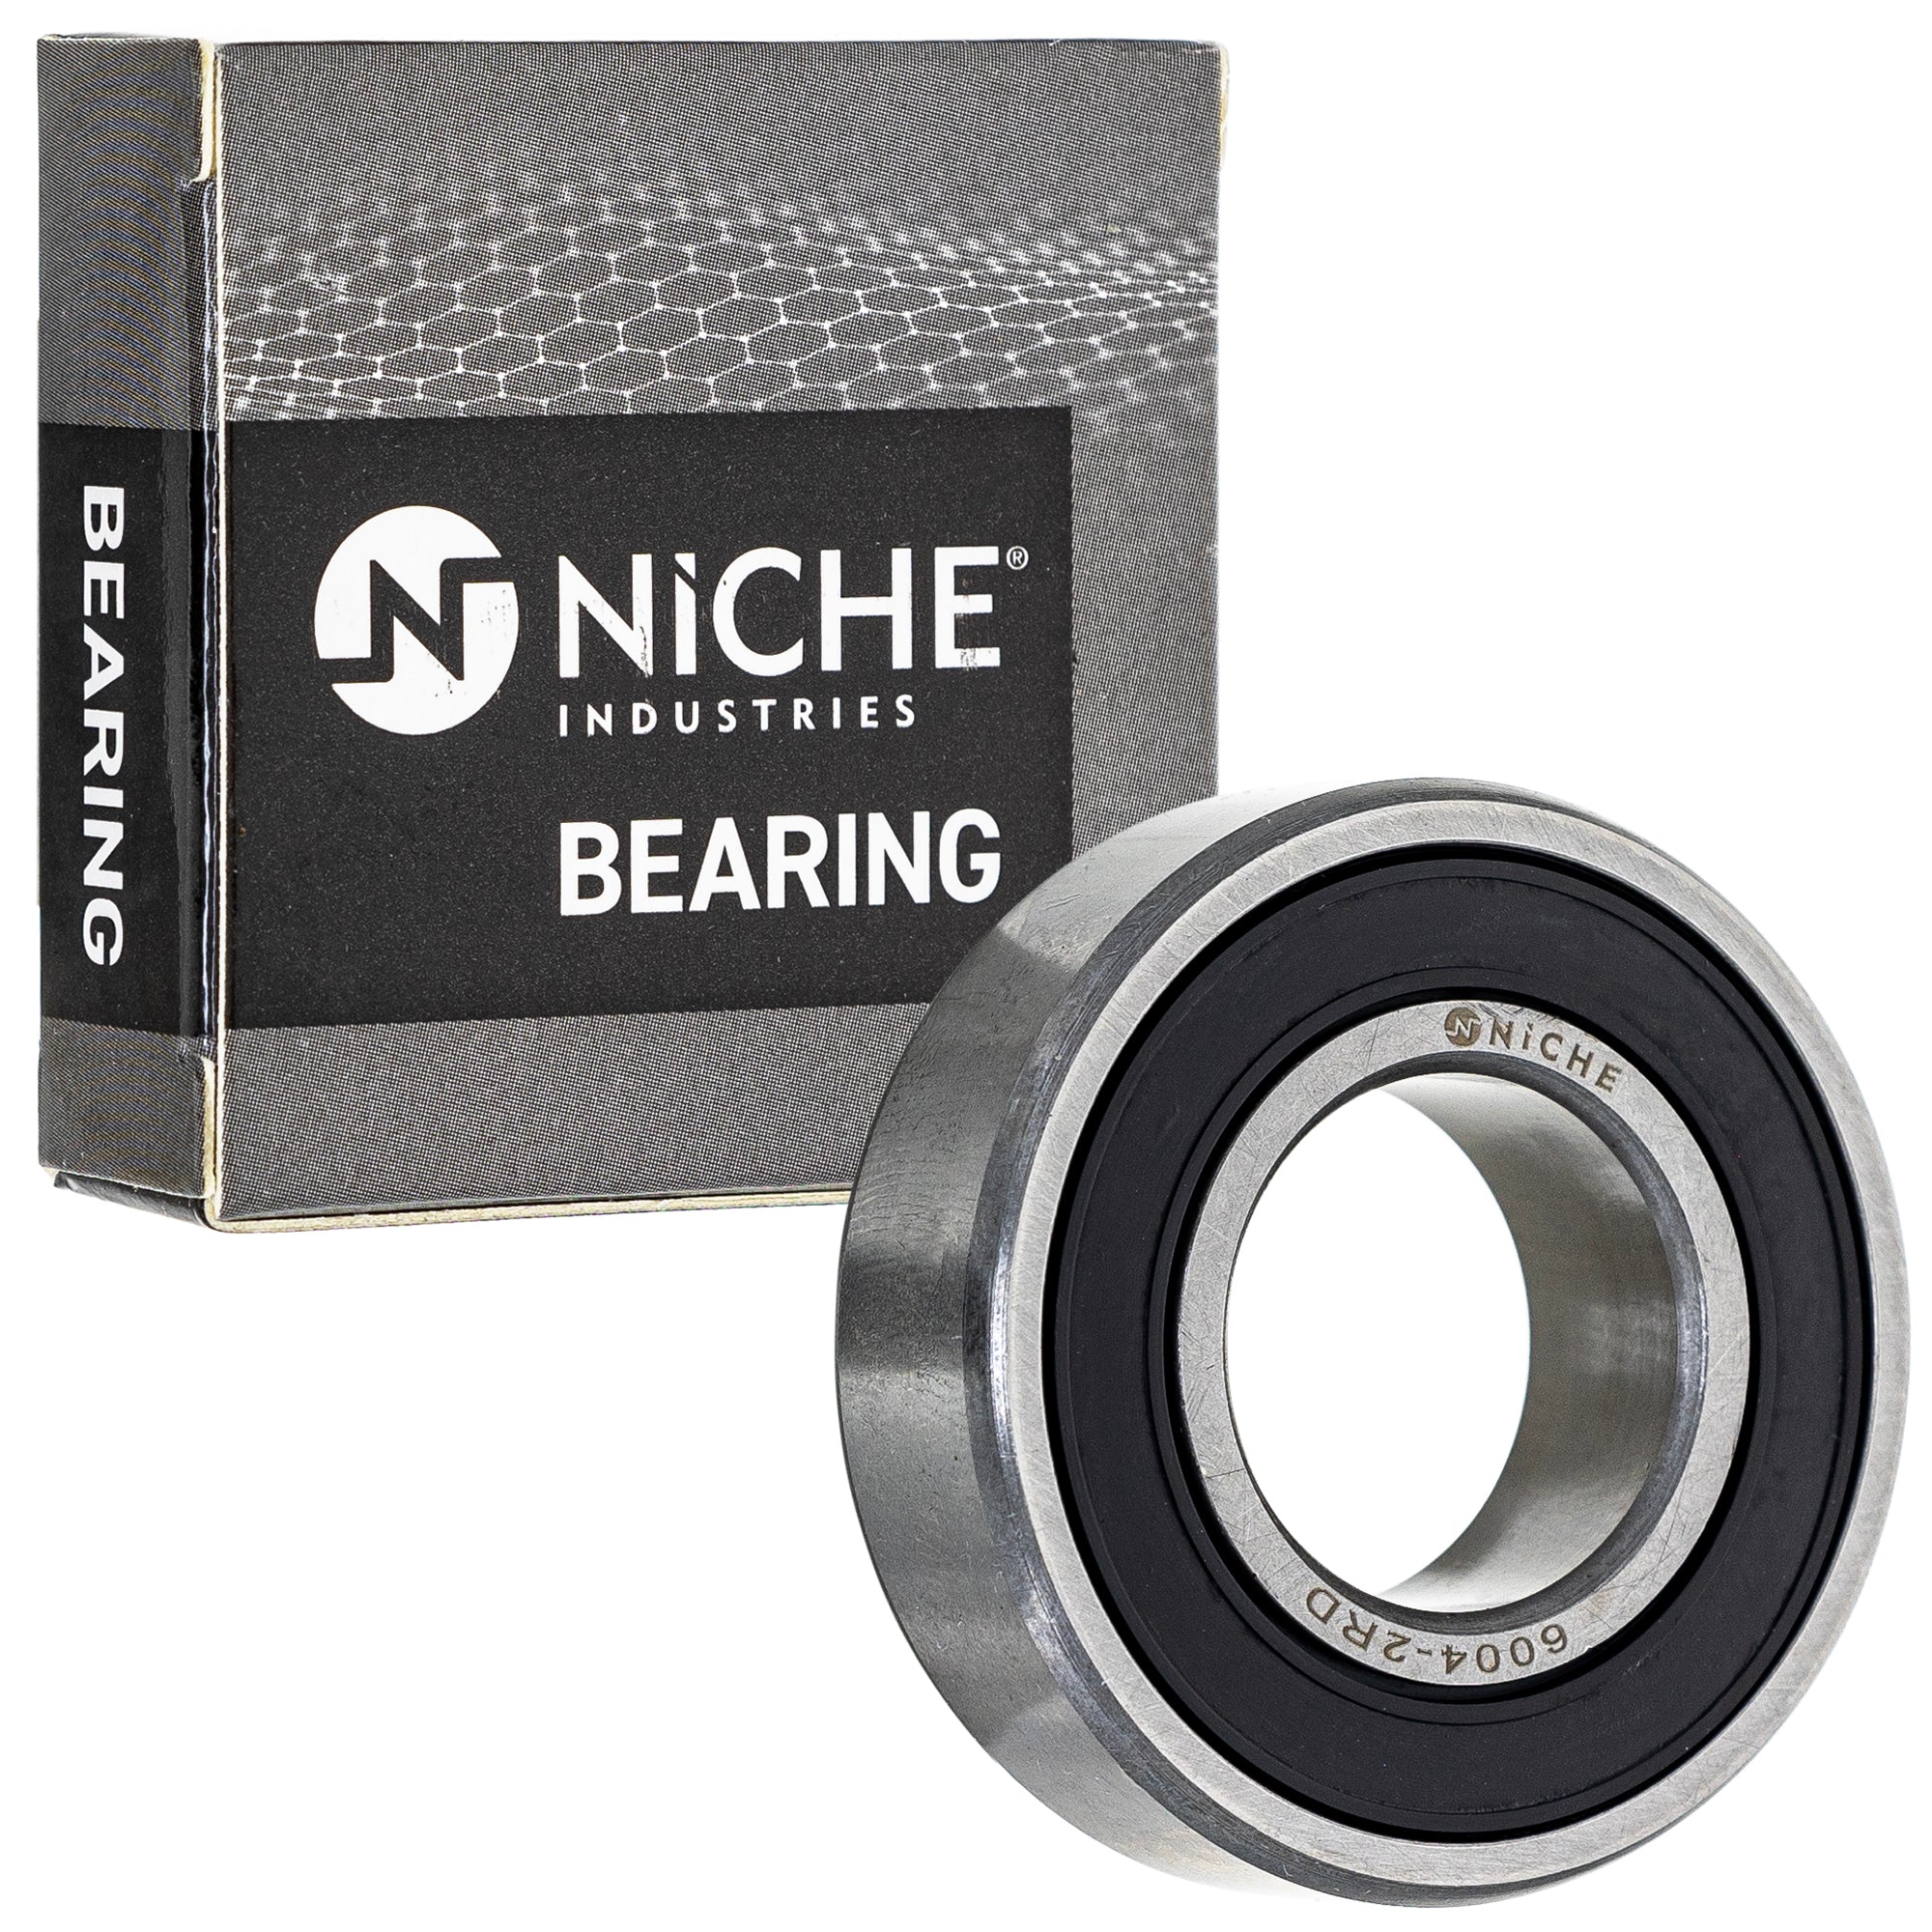 NICHE 519-CBB2230R Bearing & Seal Kit 10-Pack for zOTHER TTR110E